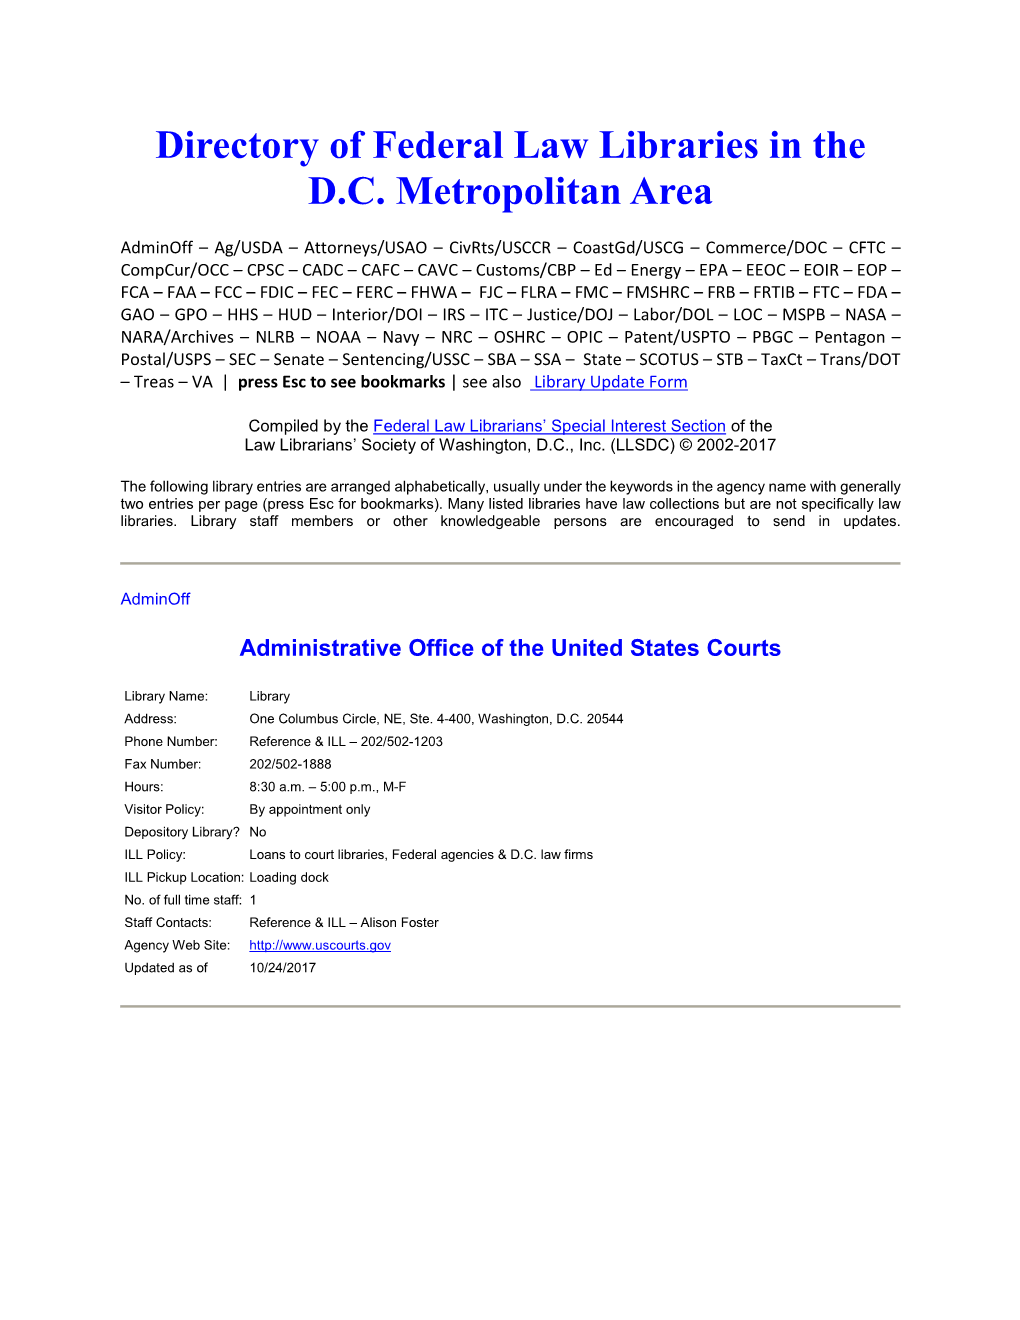 Directory of Federal Law Libraries in the D.C. Metropolitan Area